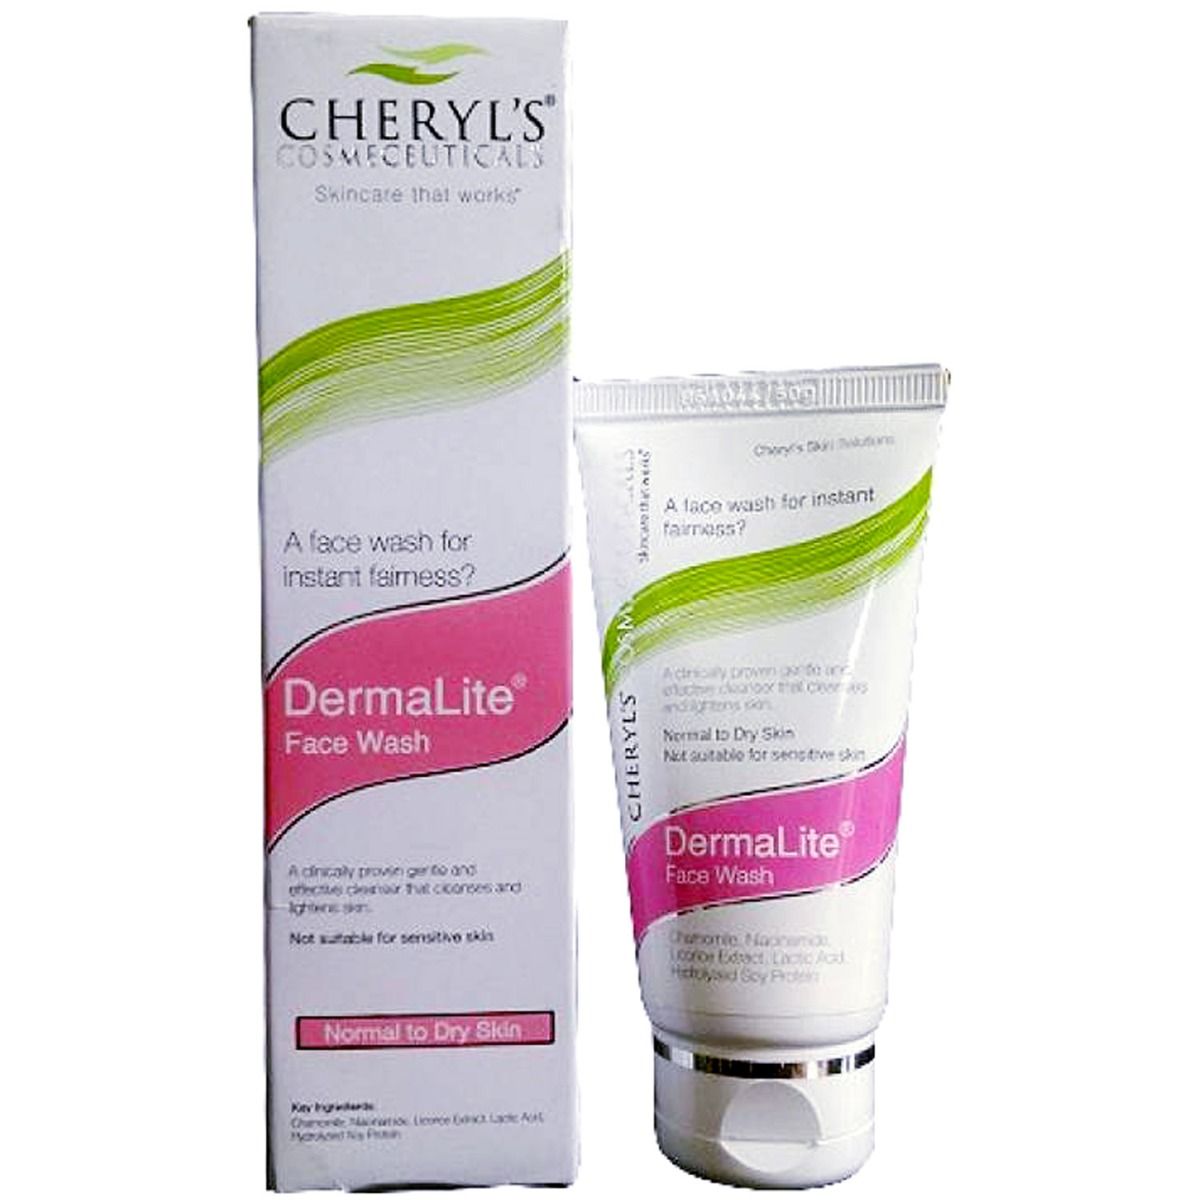 Cheryl's Dermalite Face Wash For Normal to Dry Skin, 100 ml, Pack of 1 